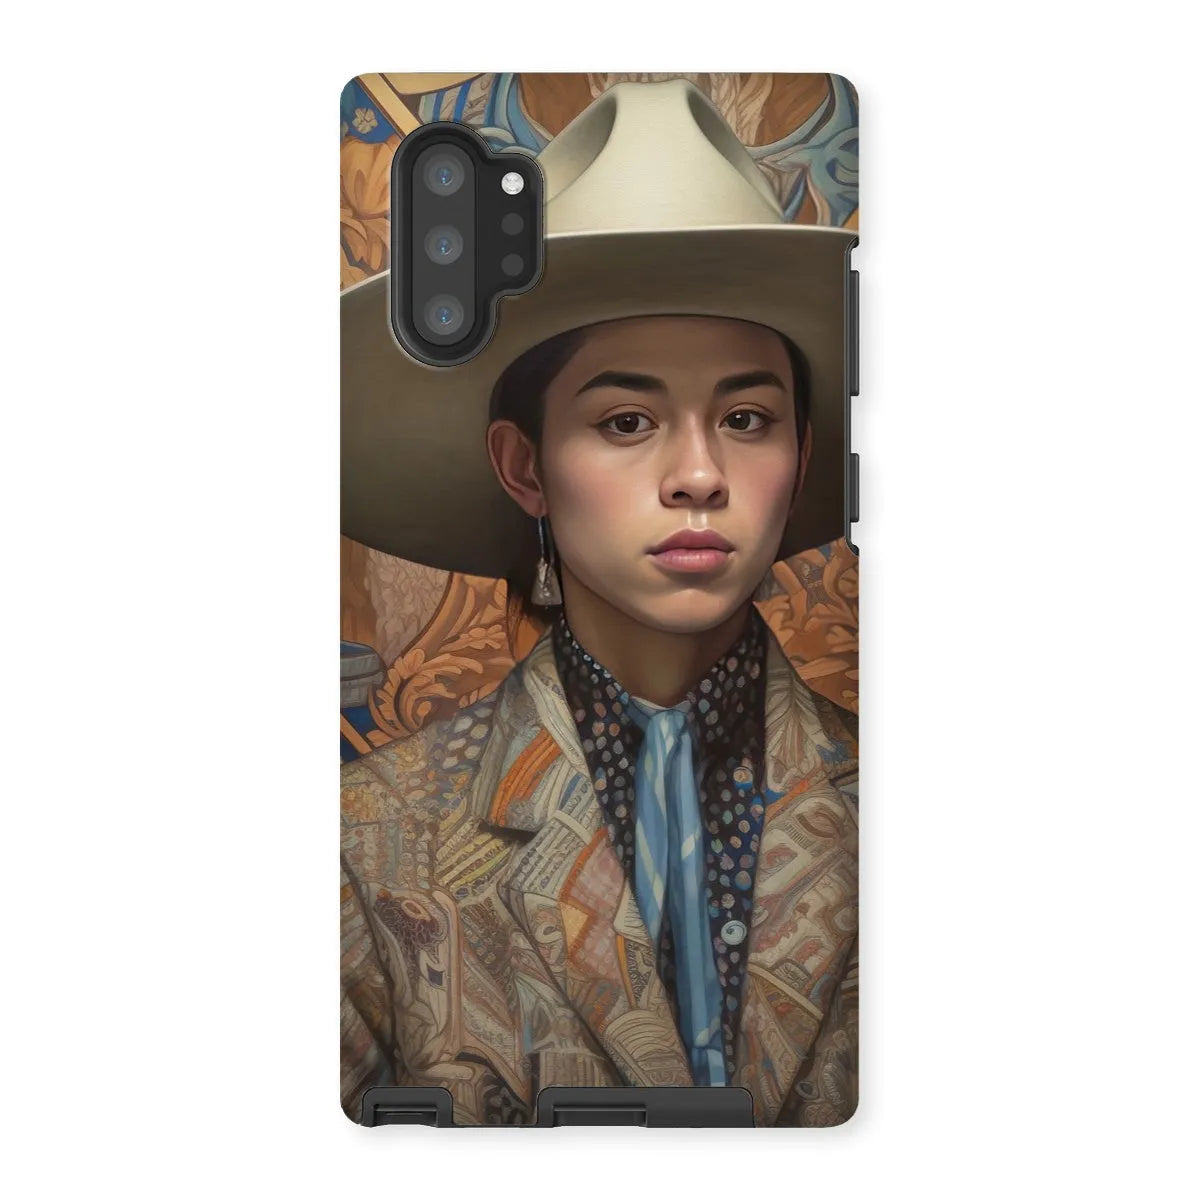 Angel The Transgender Cowboy - F2m Outlaw Art Phone Case - Samsung Galaxy Note 10p / Matte - Mobile Phone Cases